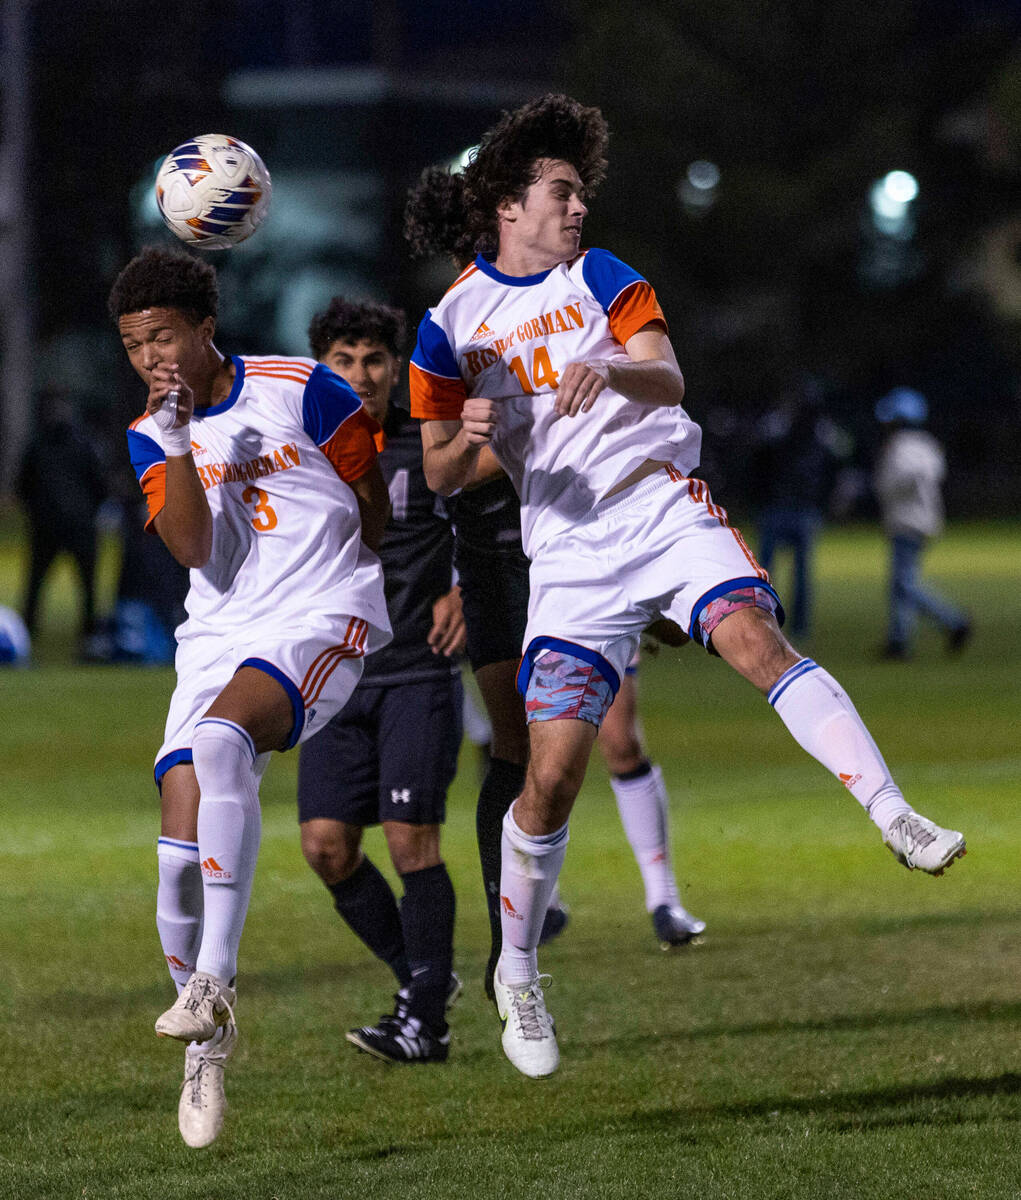 Bishop Gorman's Bronson Rolley (3) and Austin Garlan (14) battle for the ball over Cimarron's d ...